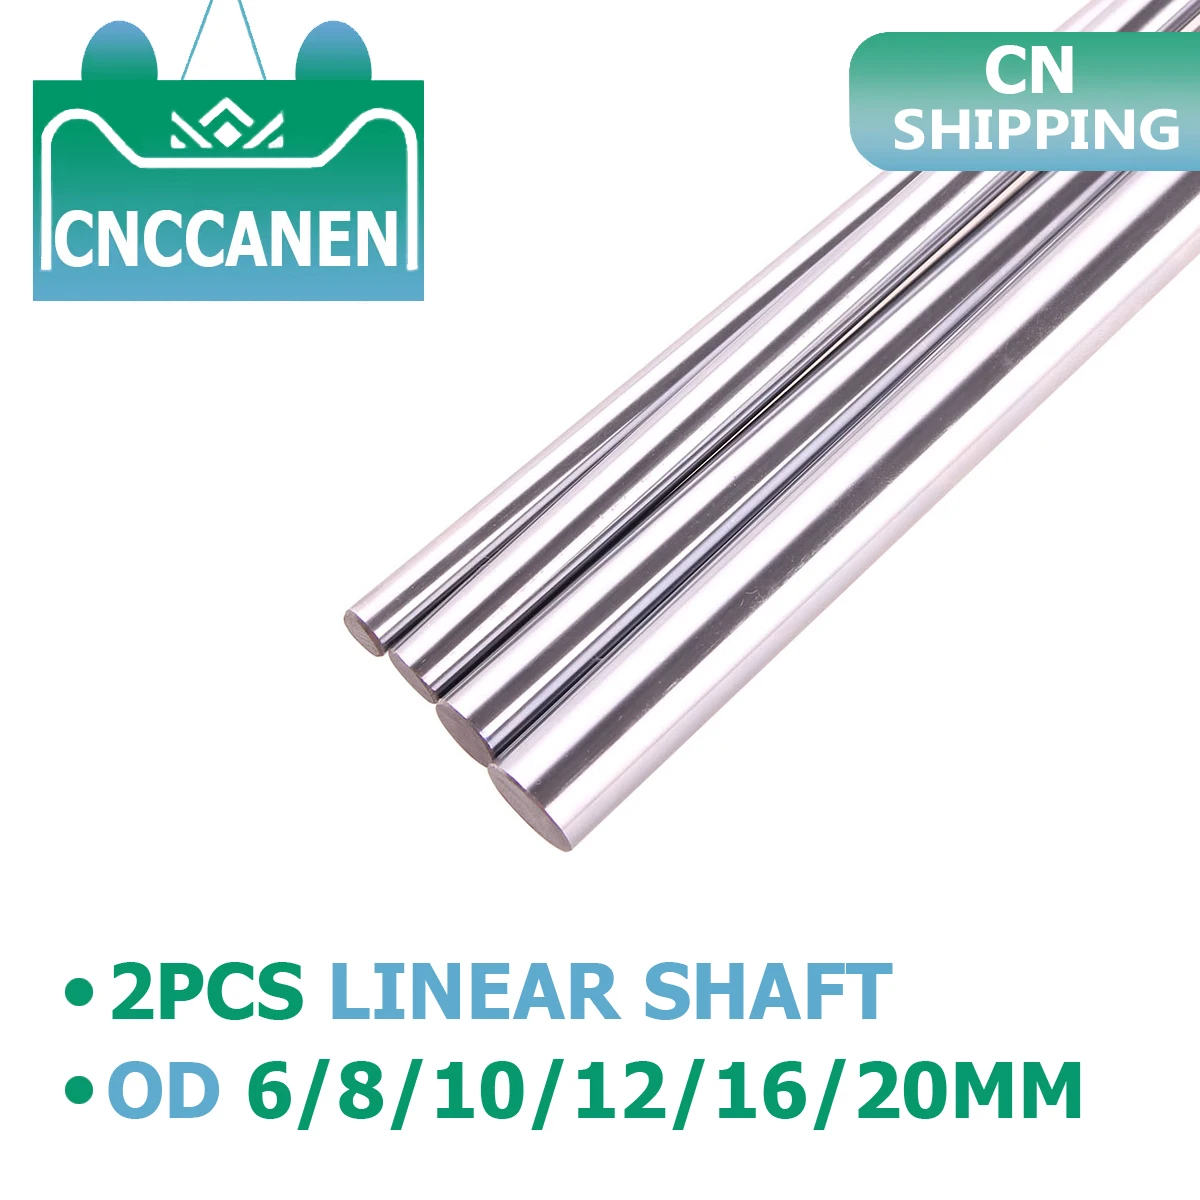 25mm  Diameter Chrome-plating Cylinder Liner Rail Linear Shaft Optical Axis Rod 